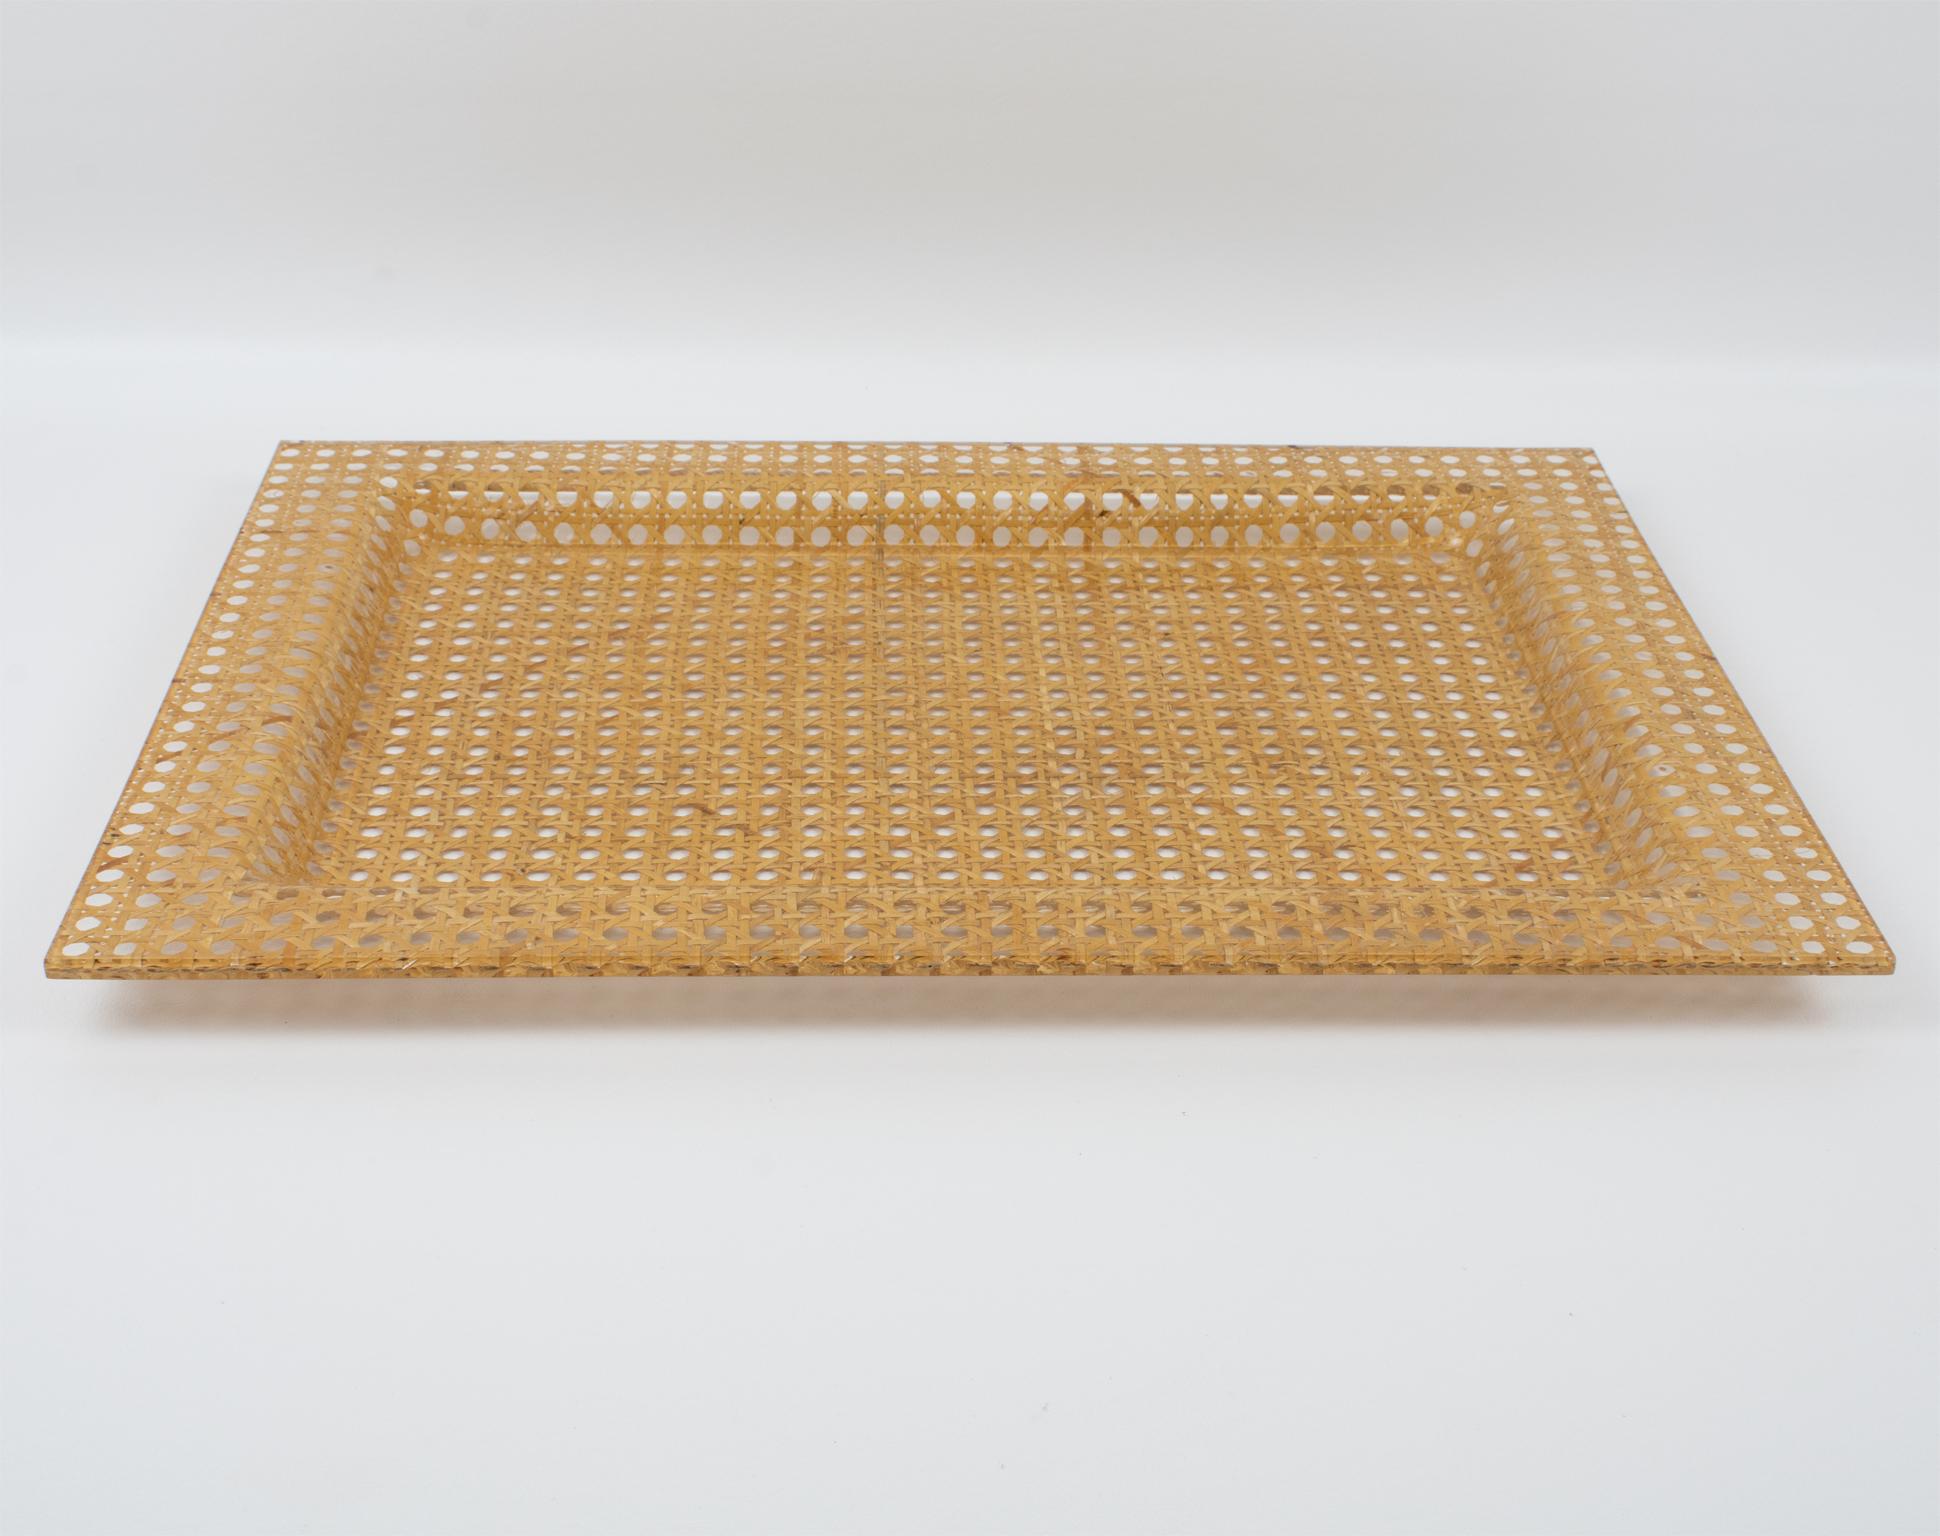 Italian Barware Serving Tray Lucite and Rattan, Italy 1970s For Sale